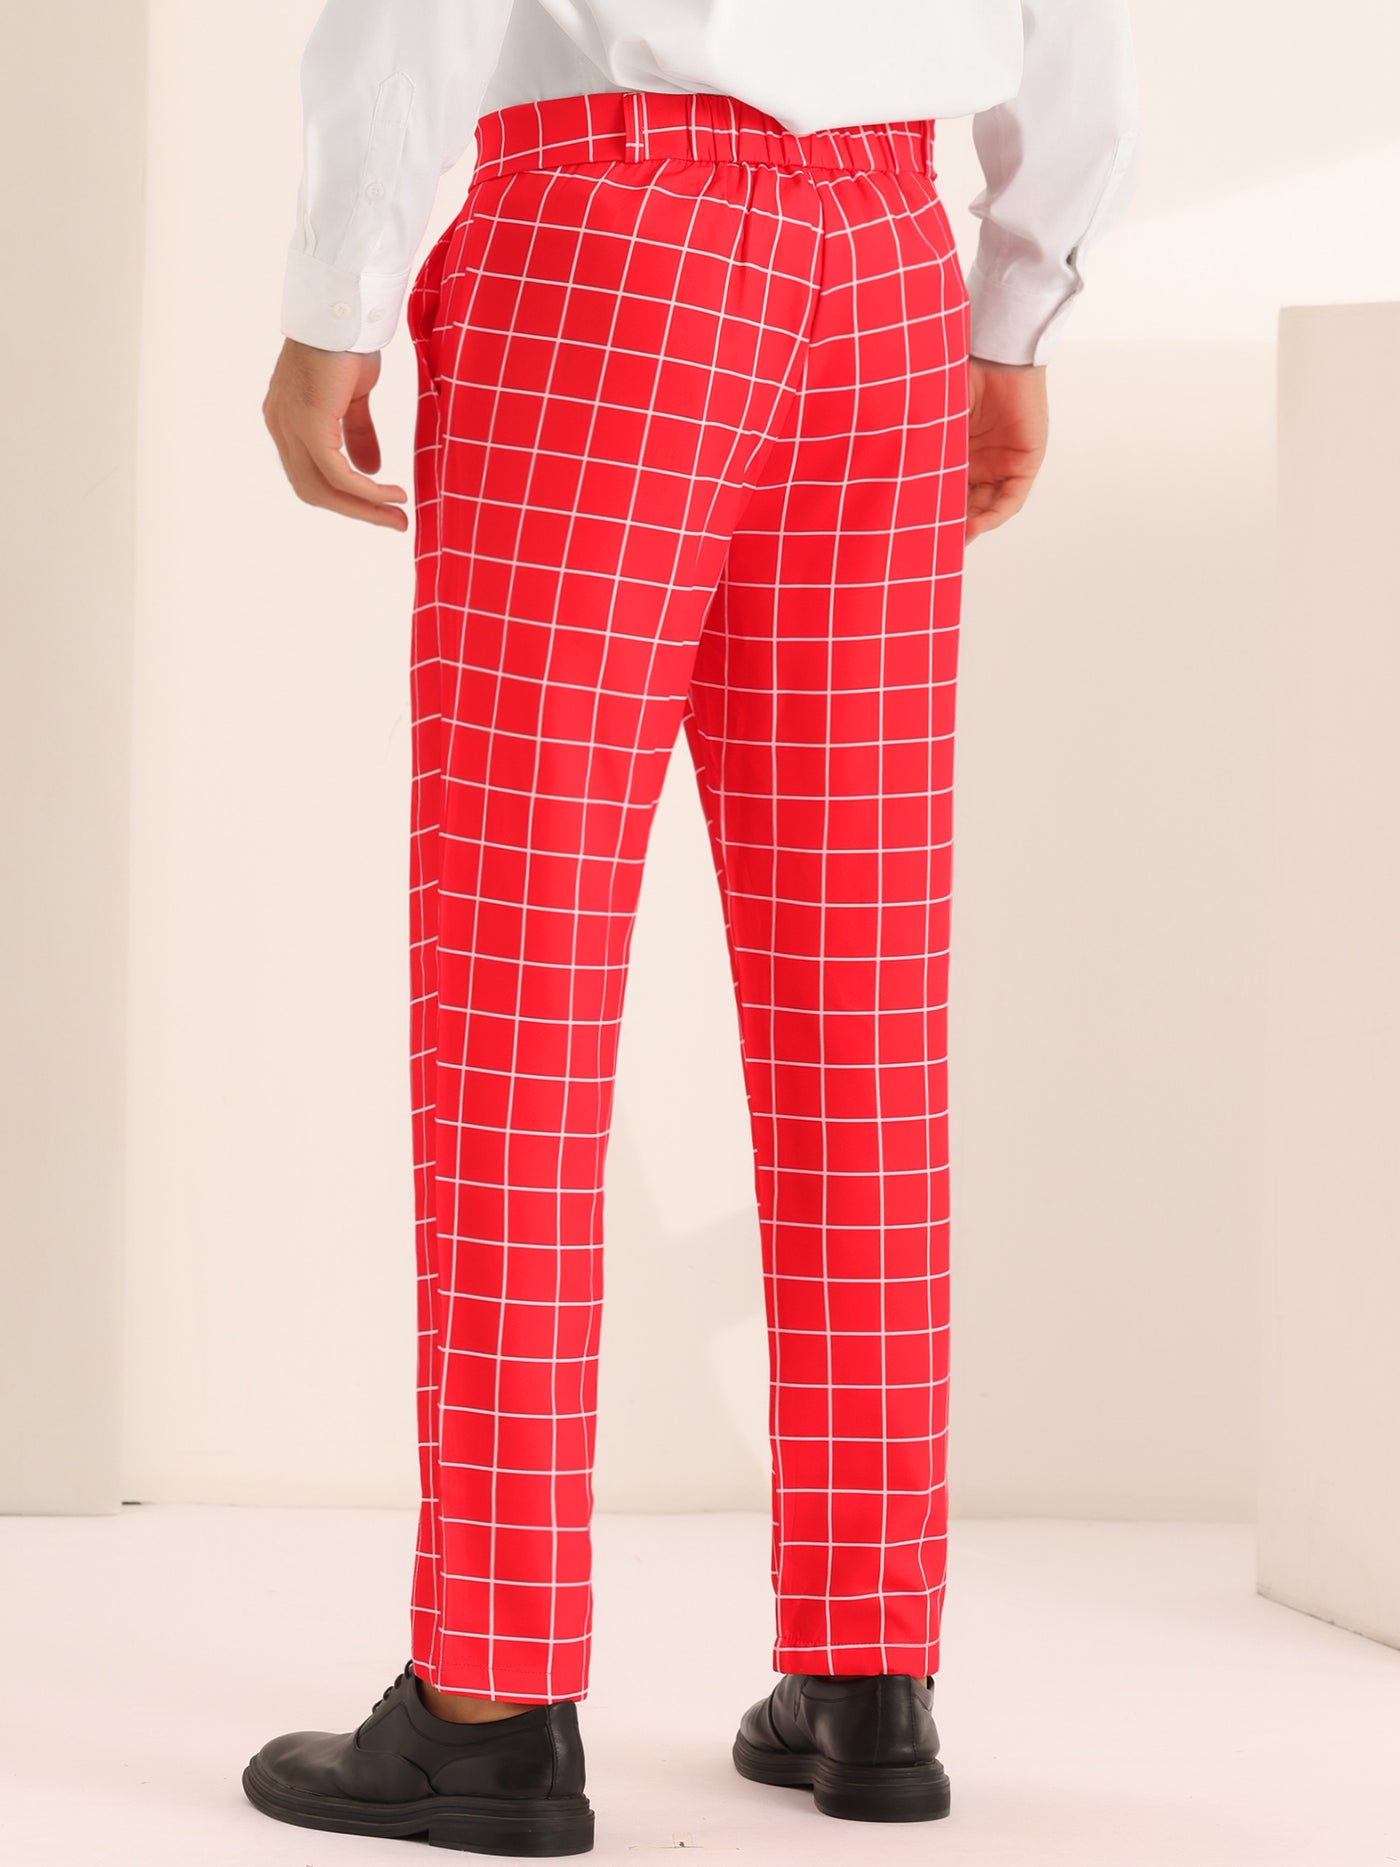 Bublédon Plaid Pants for Men's Slim Fit Business Checked Printed Dress Trousers